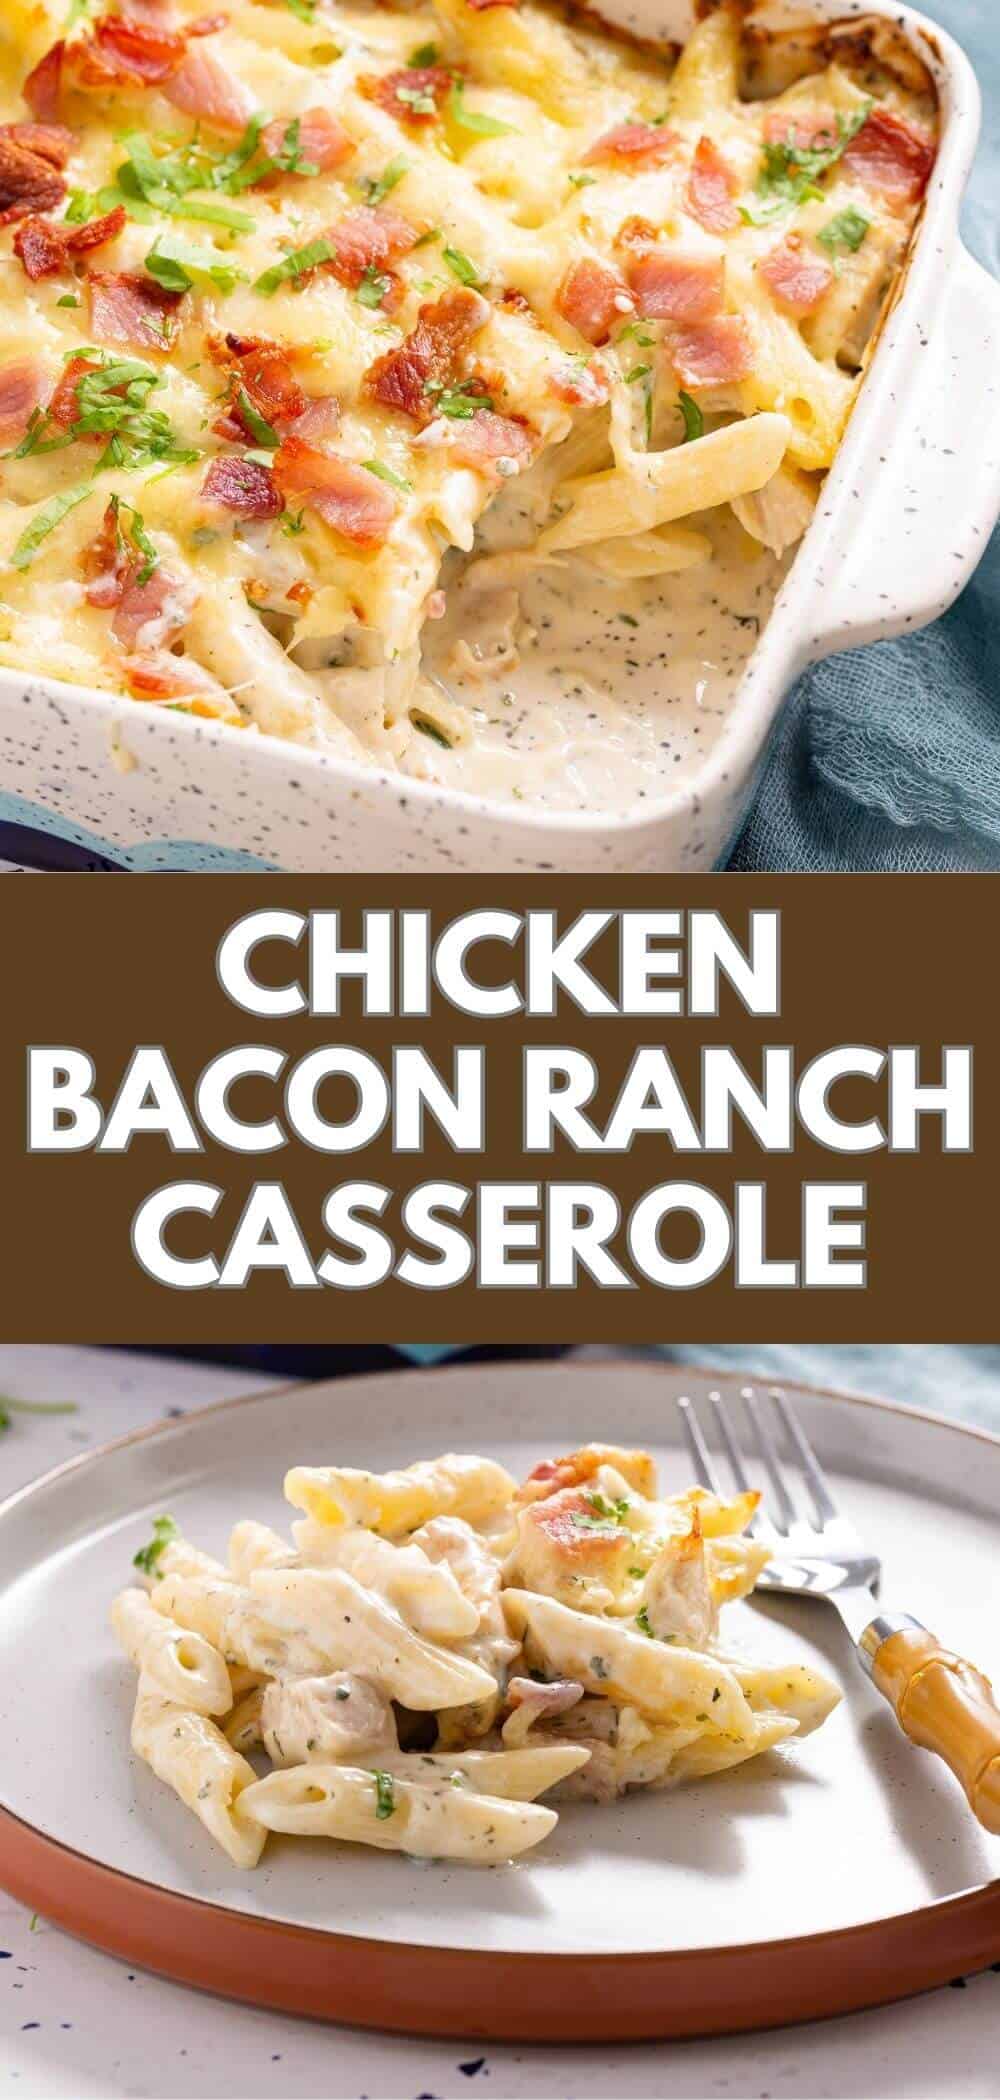 Chicken bacon ranch casserole images with text.